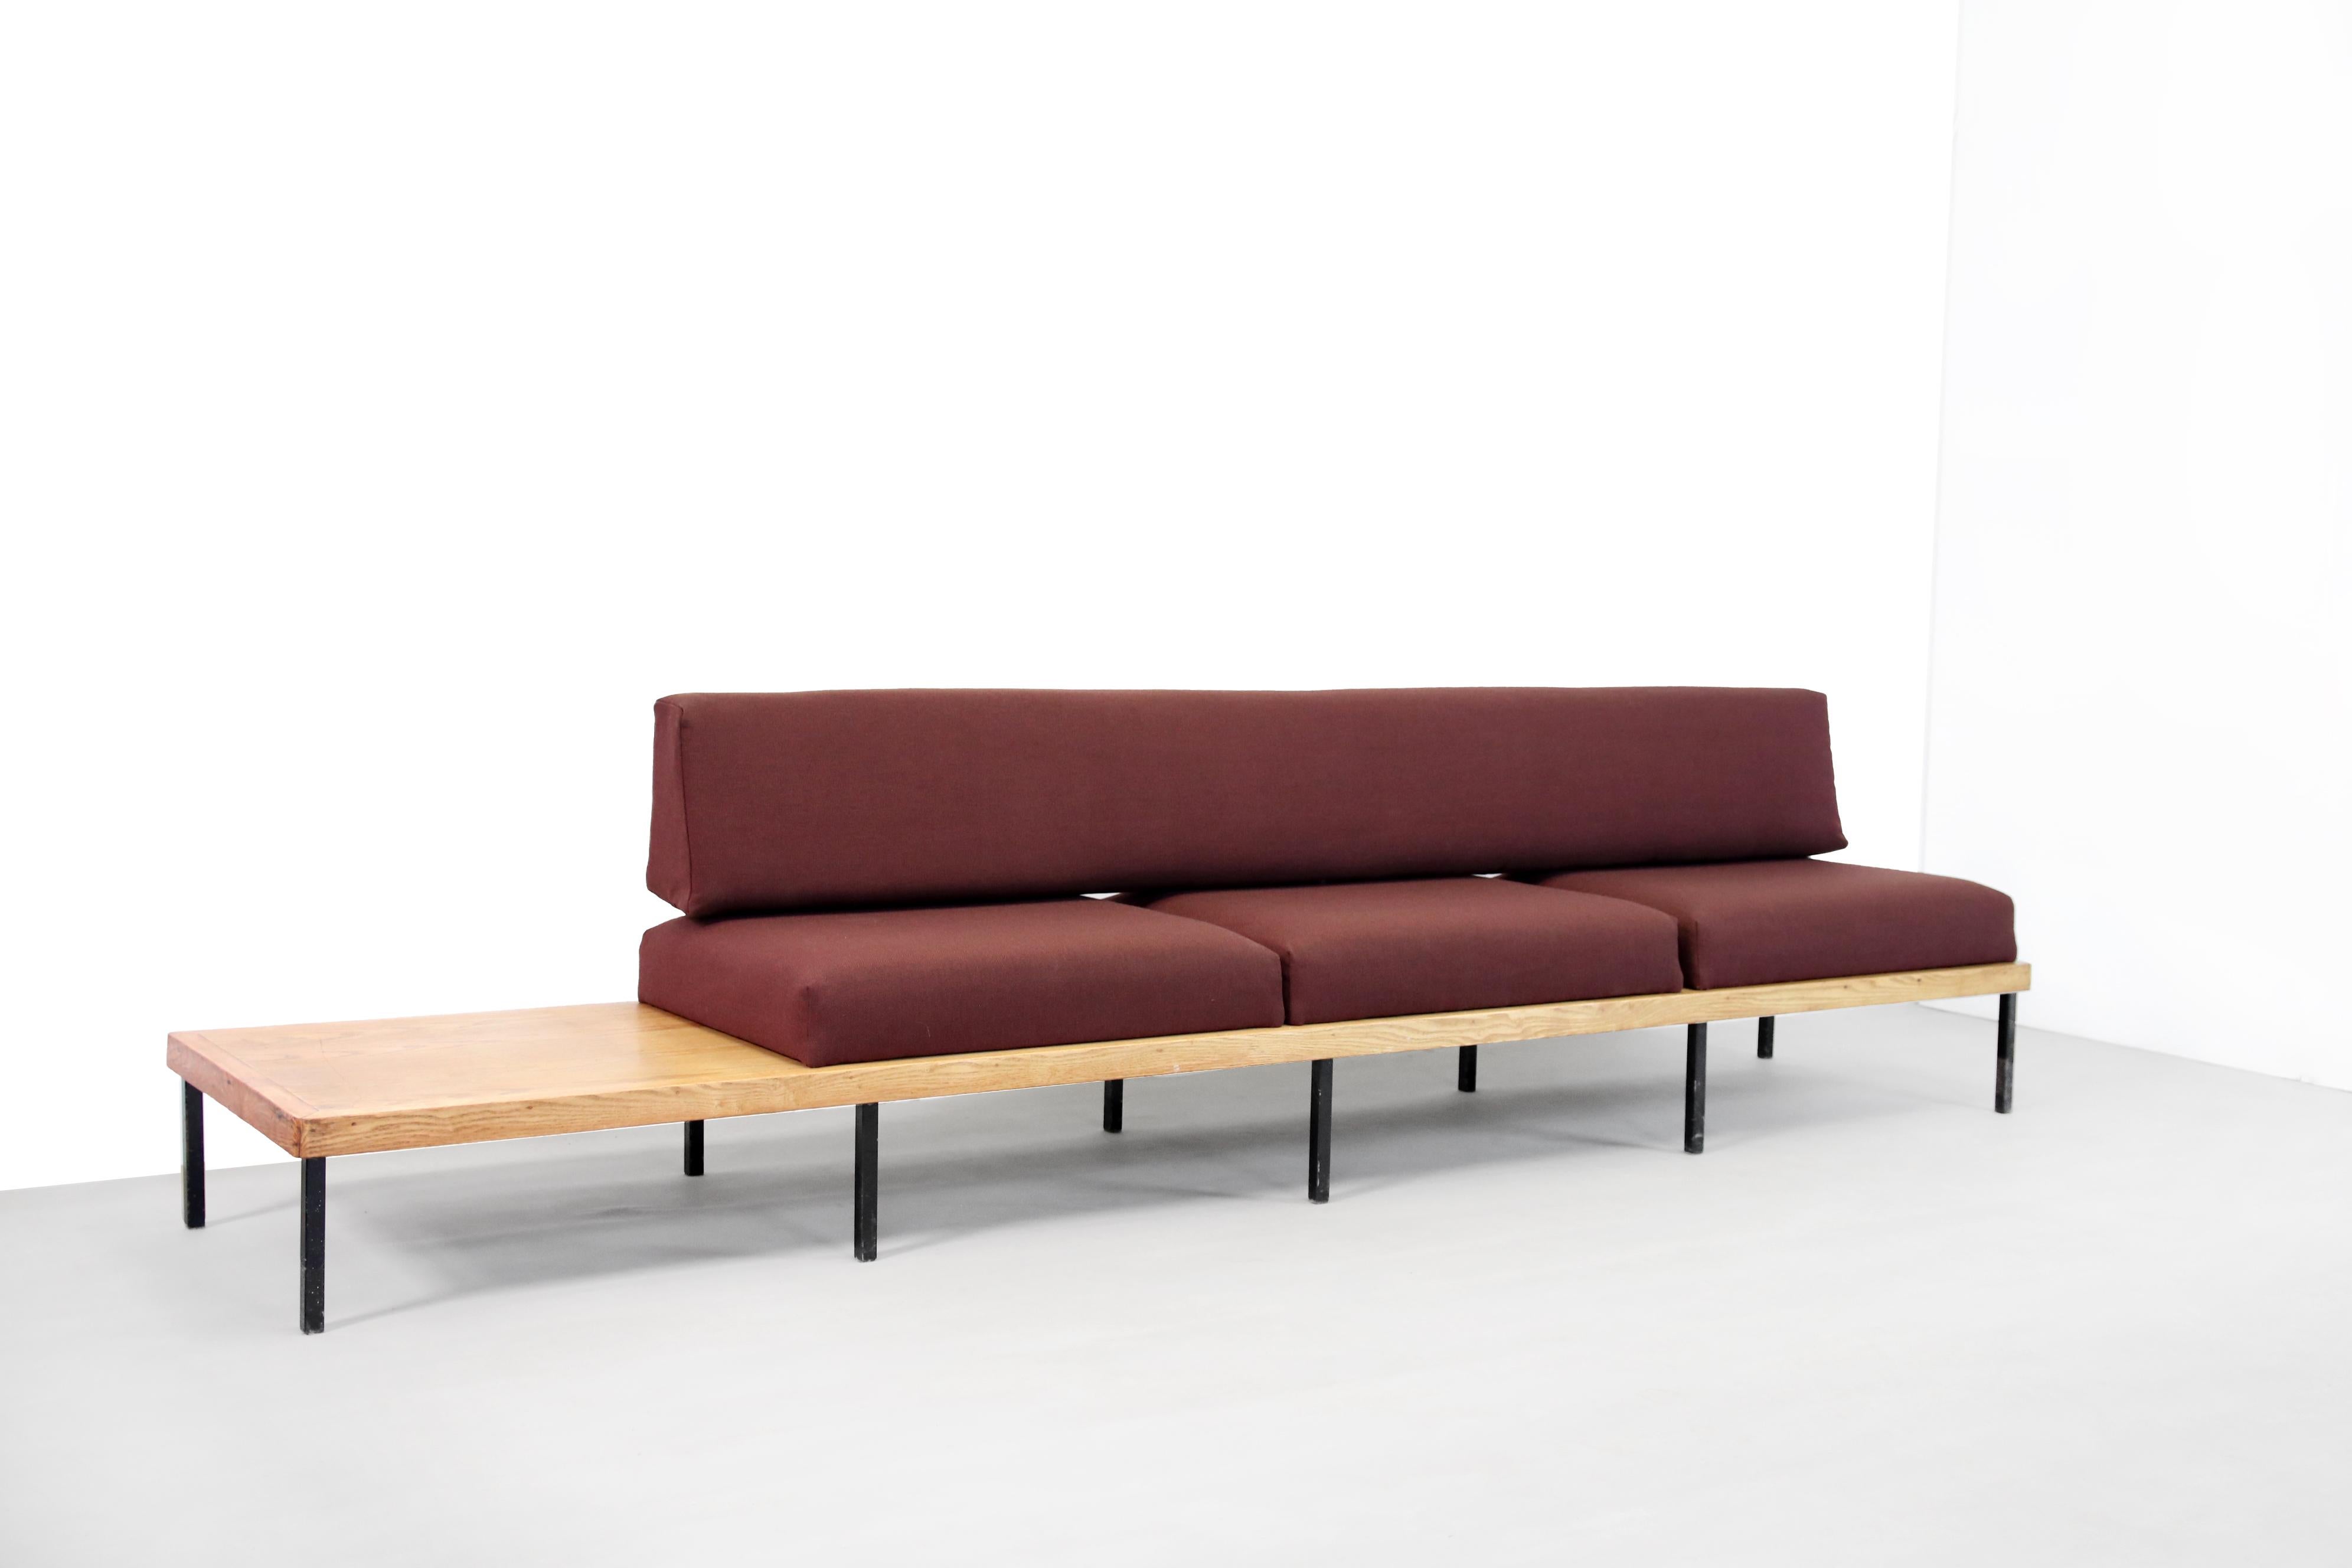 Beautiful Minimalist design bench in oak with a black metal base. The design is very similar to the designs of Kho Liang Ie or Charlotte Perriand from Europe. It is an exceptionally long sofa with integrated table. The cushions and back cushion are